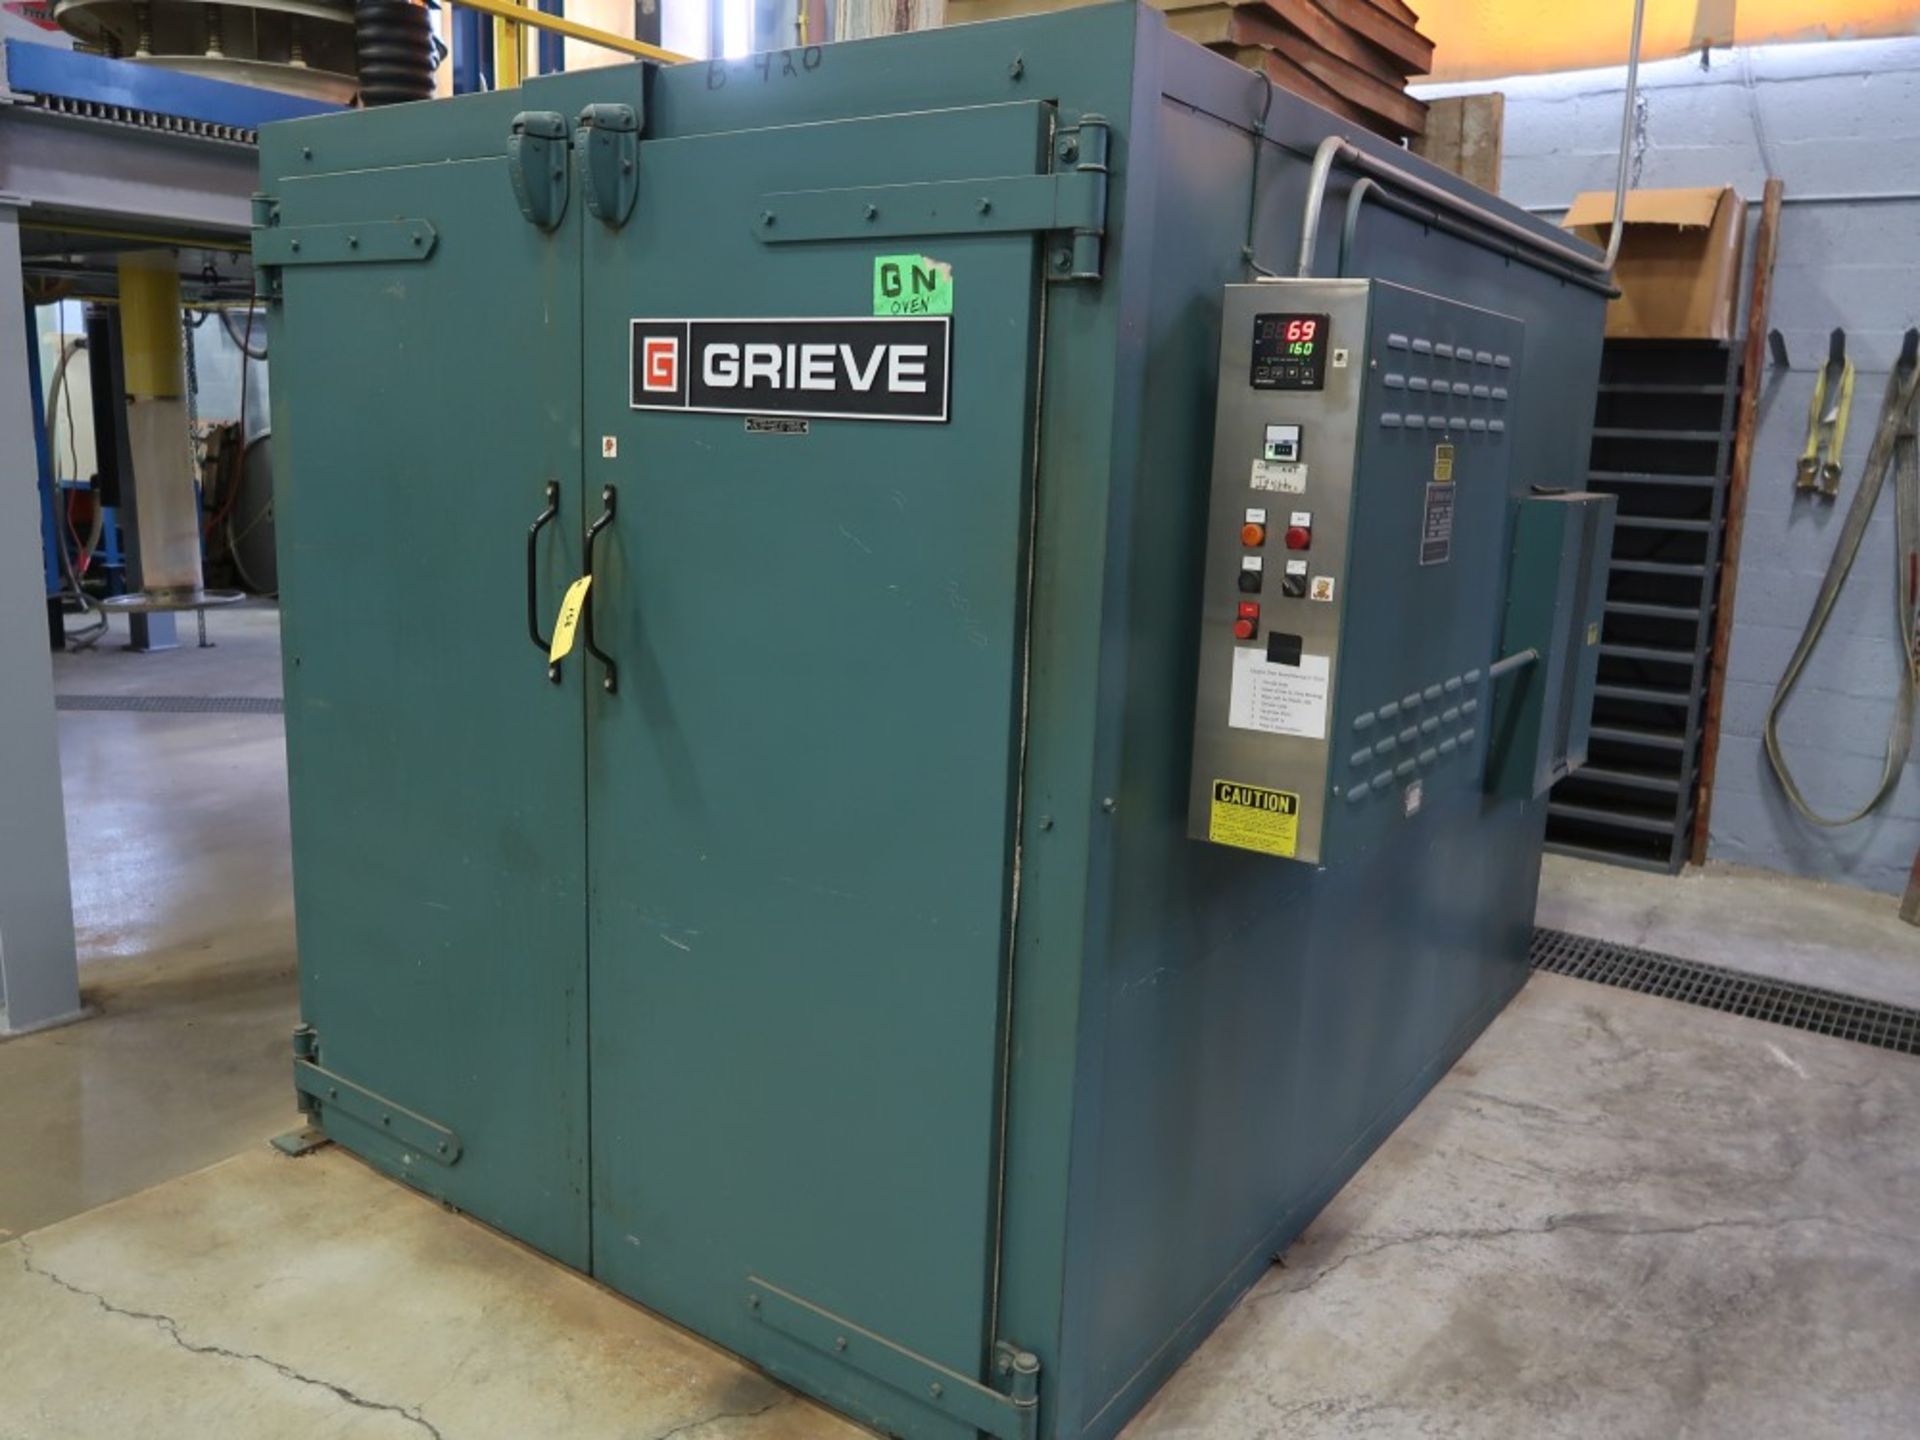 Grieve Model B2H-650 Electric Oven S/N 411532, 2-Door, 54" W x 72" H x 88" D, Max Temp 650 Degrees